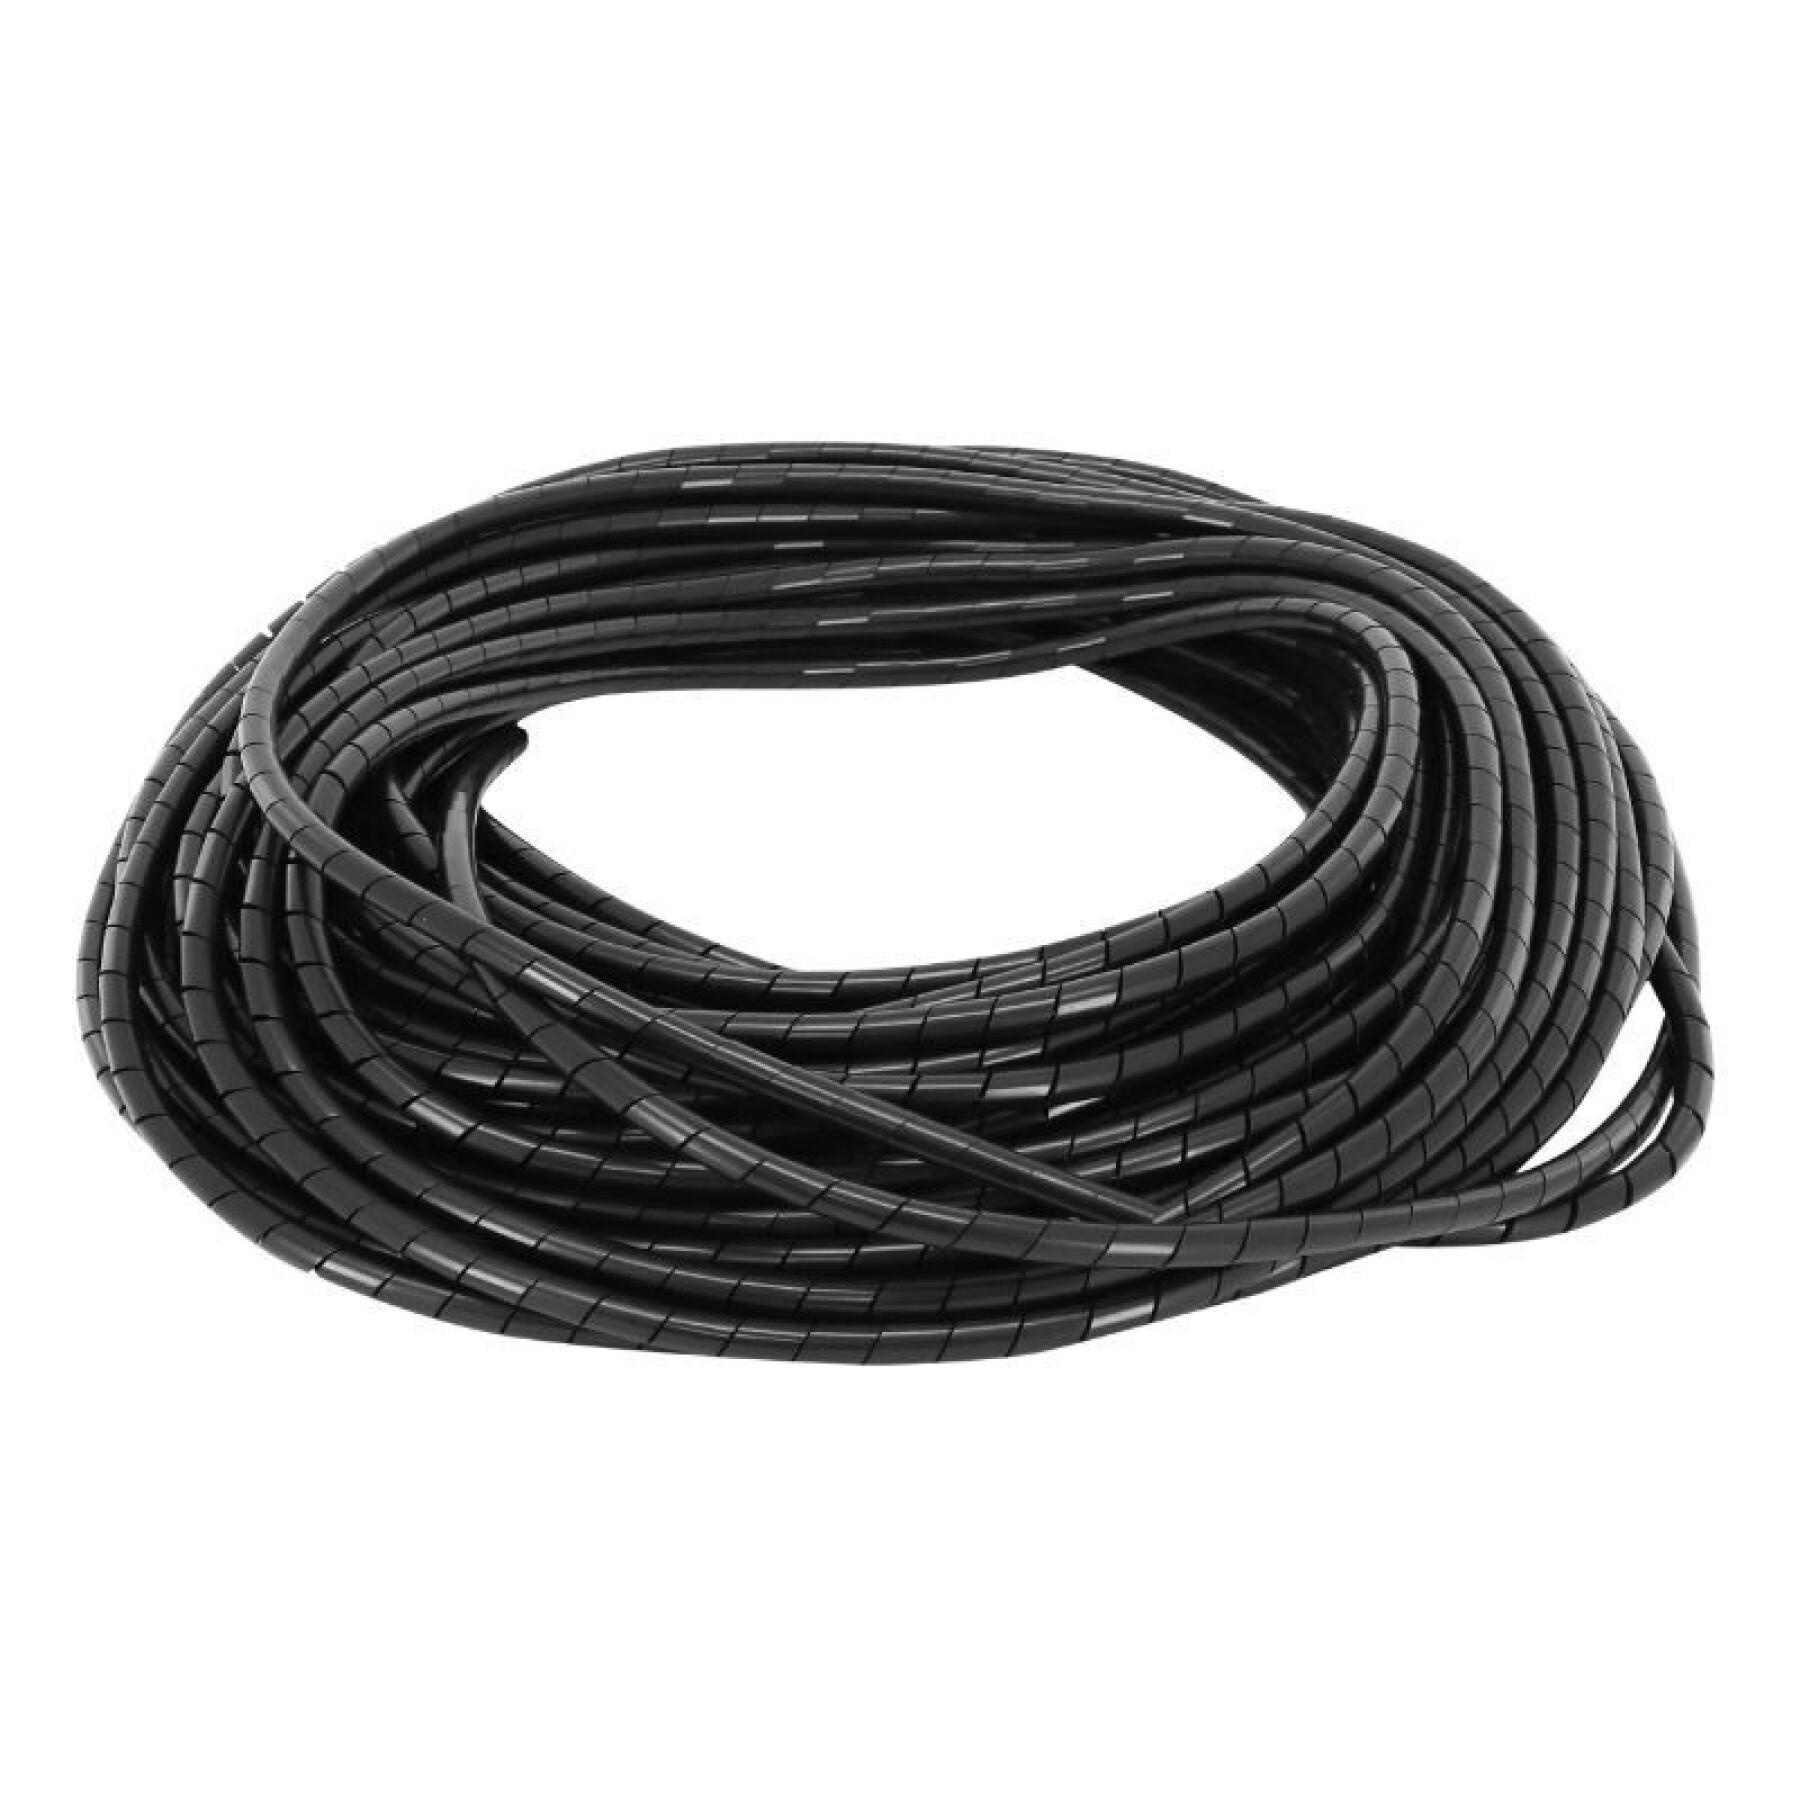 Flexible spiral sheath for electrical wire P2R 6-60mm